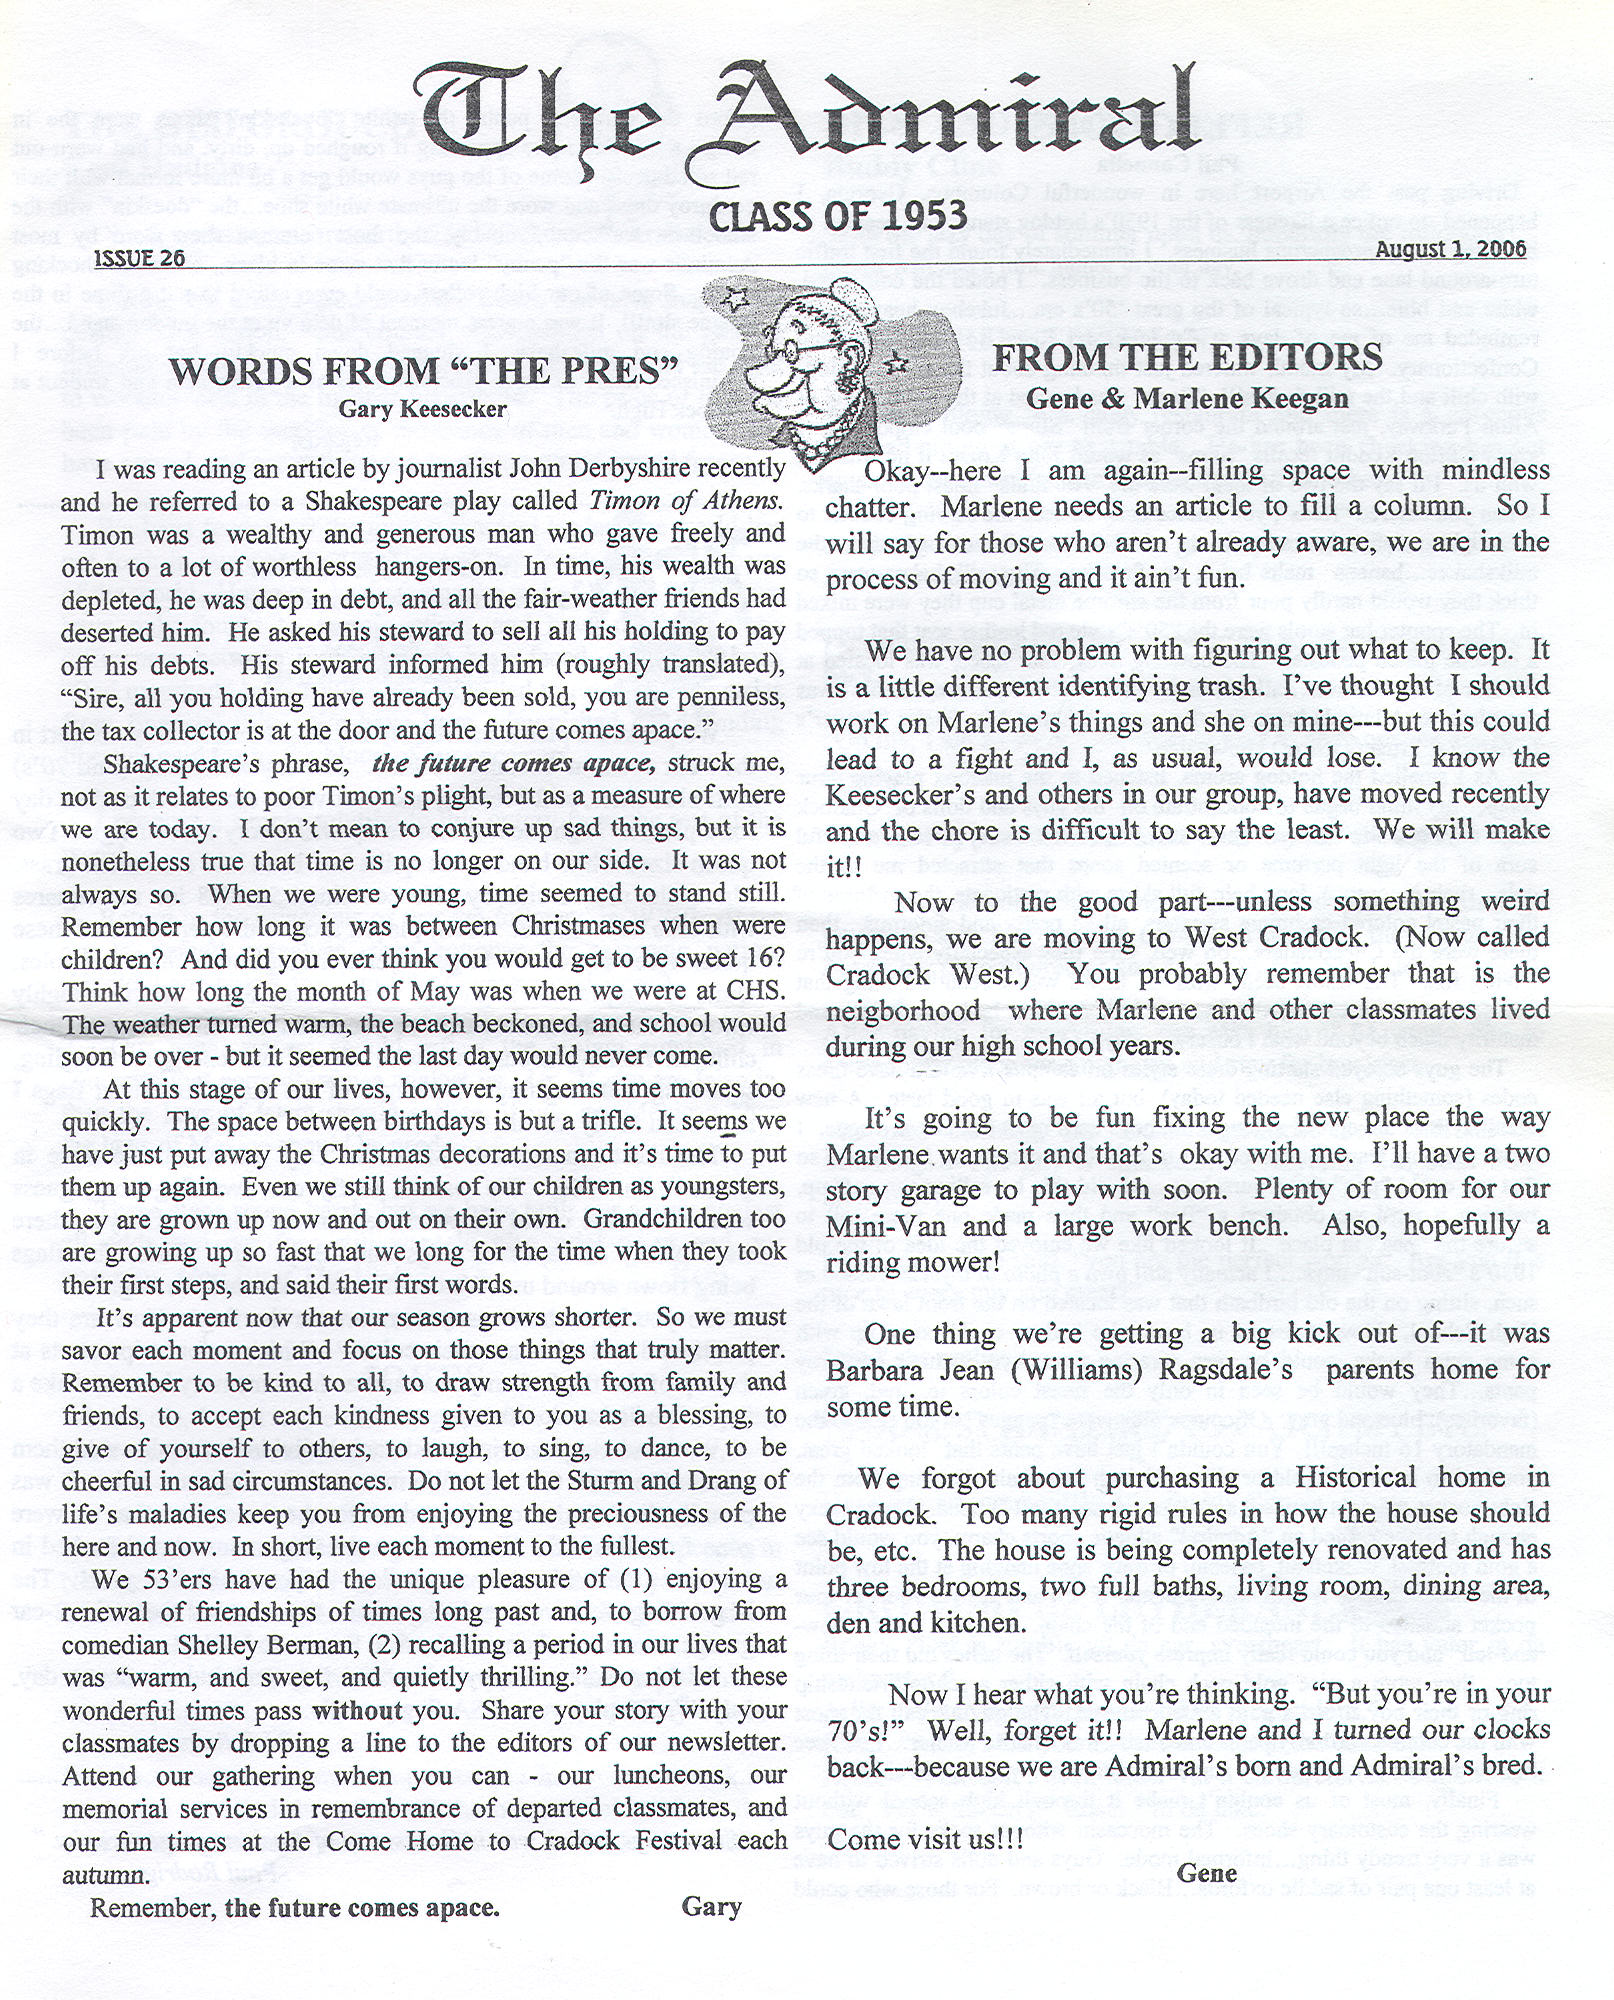 The Admiral - August 2006 - pg. 1